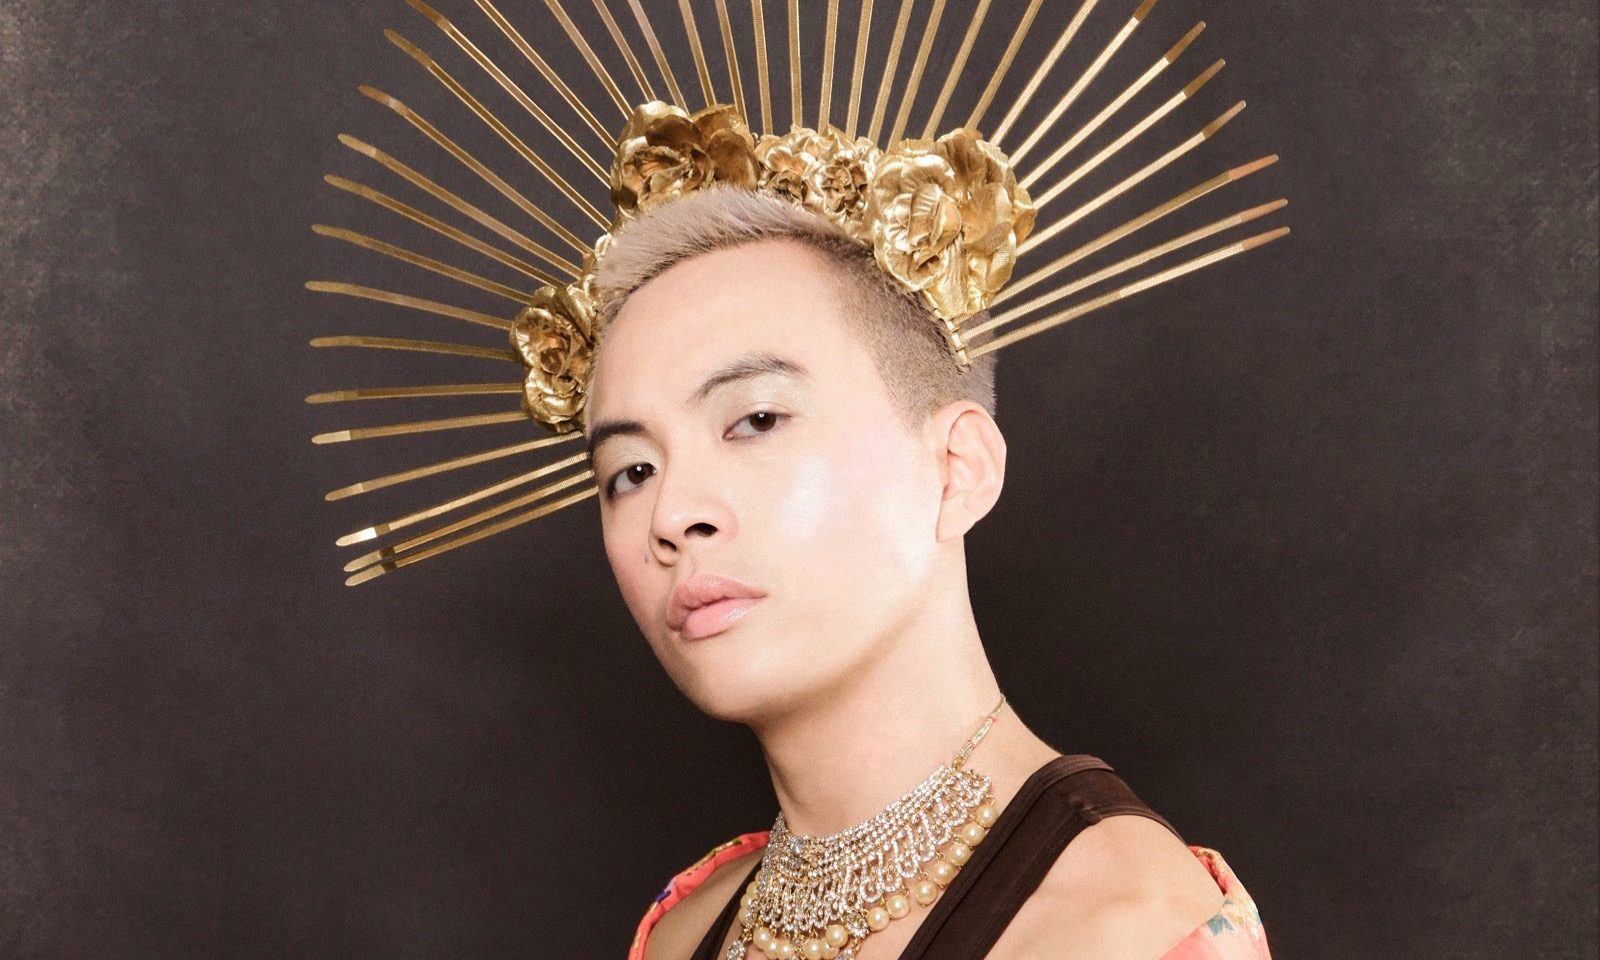 New Sydney dance party ‘Worship’ to celebrate diversity of queer art and artists